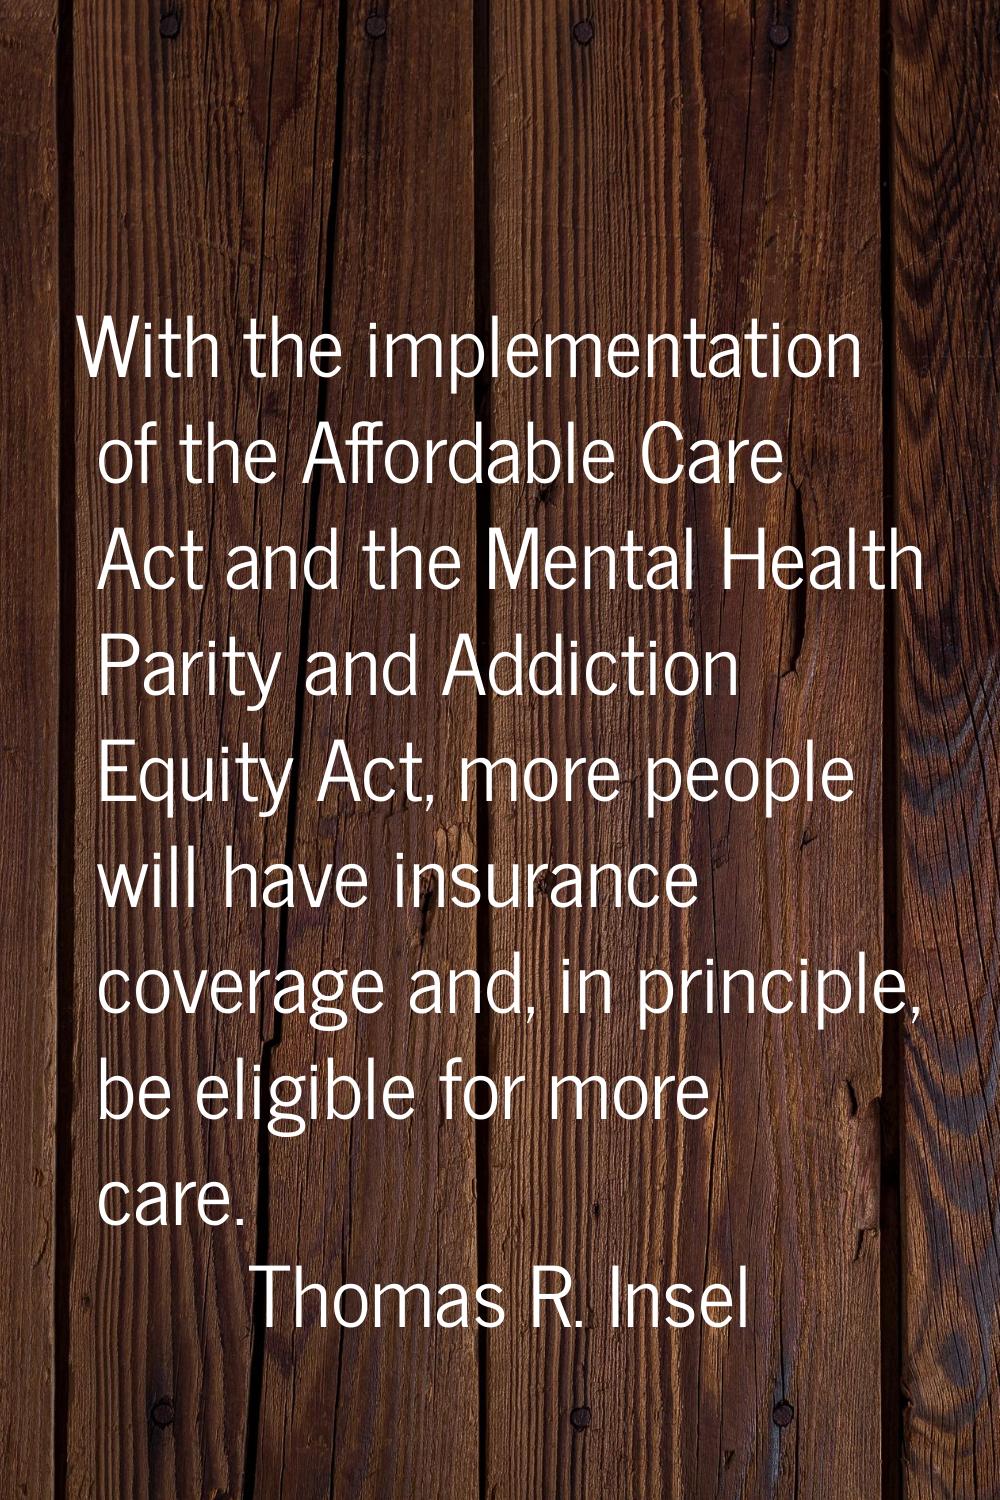 With the implementation of the Affordable Care Act and the Mental Health Parity and Addiction Equit